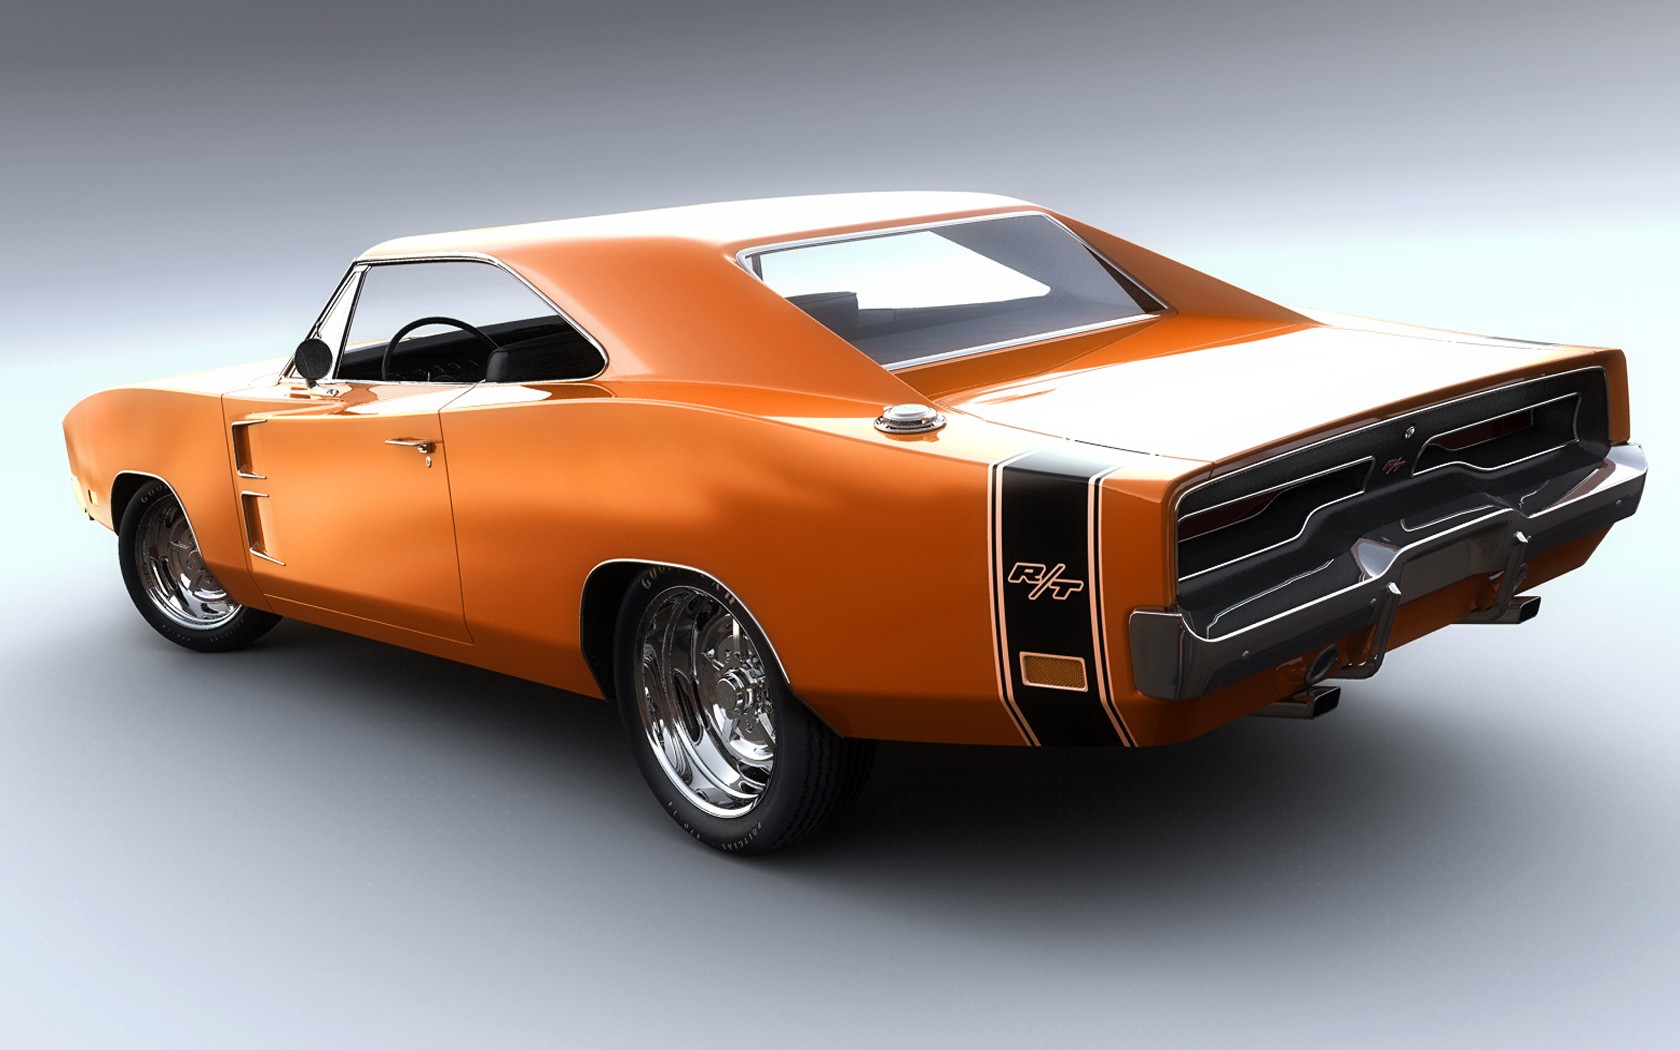 General 1680x1050 Dodge Charger orange car vehicle orange cars simple background Dodge muscle cars American cars